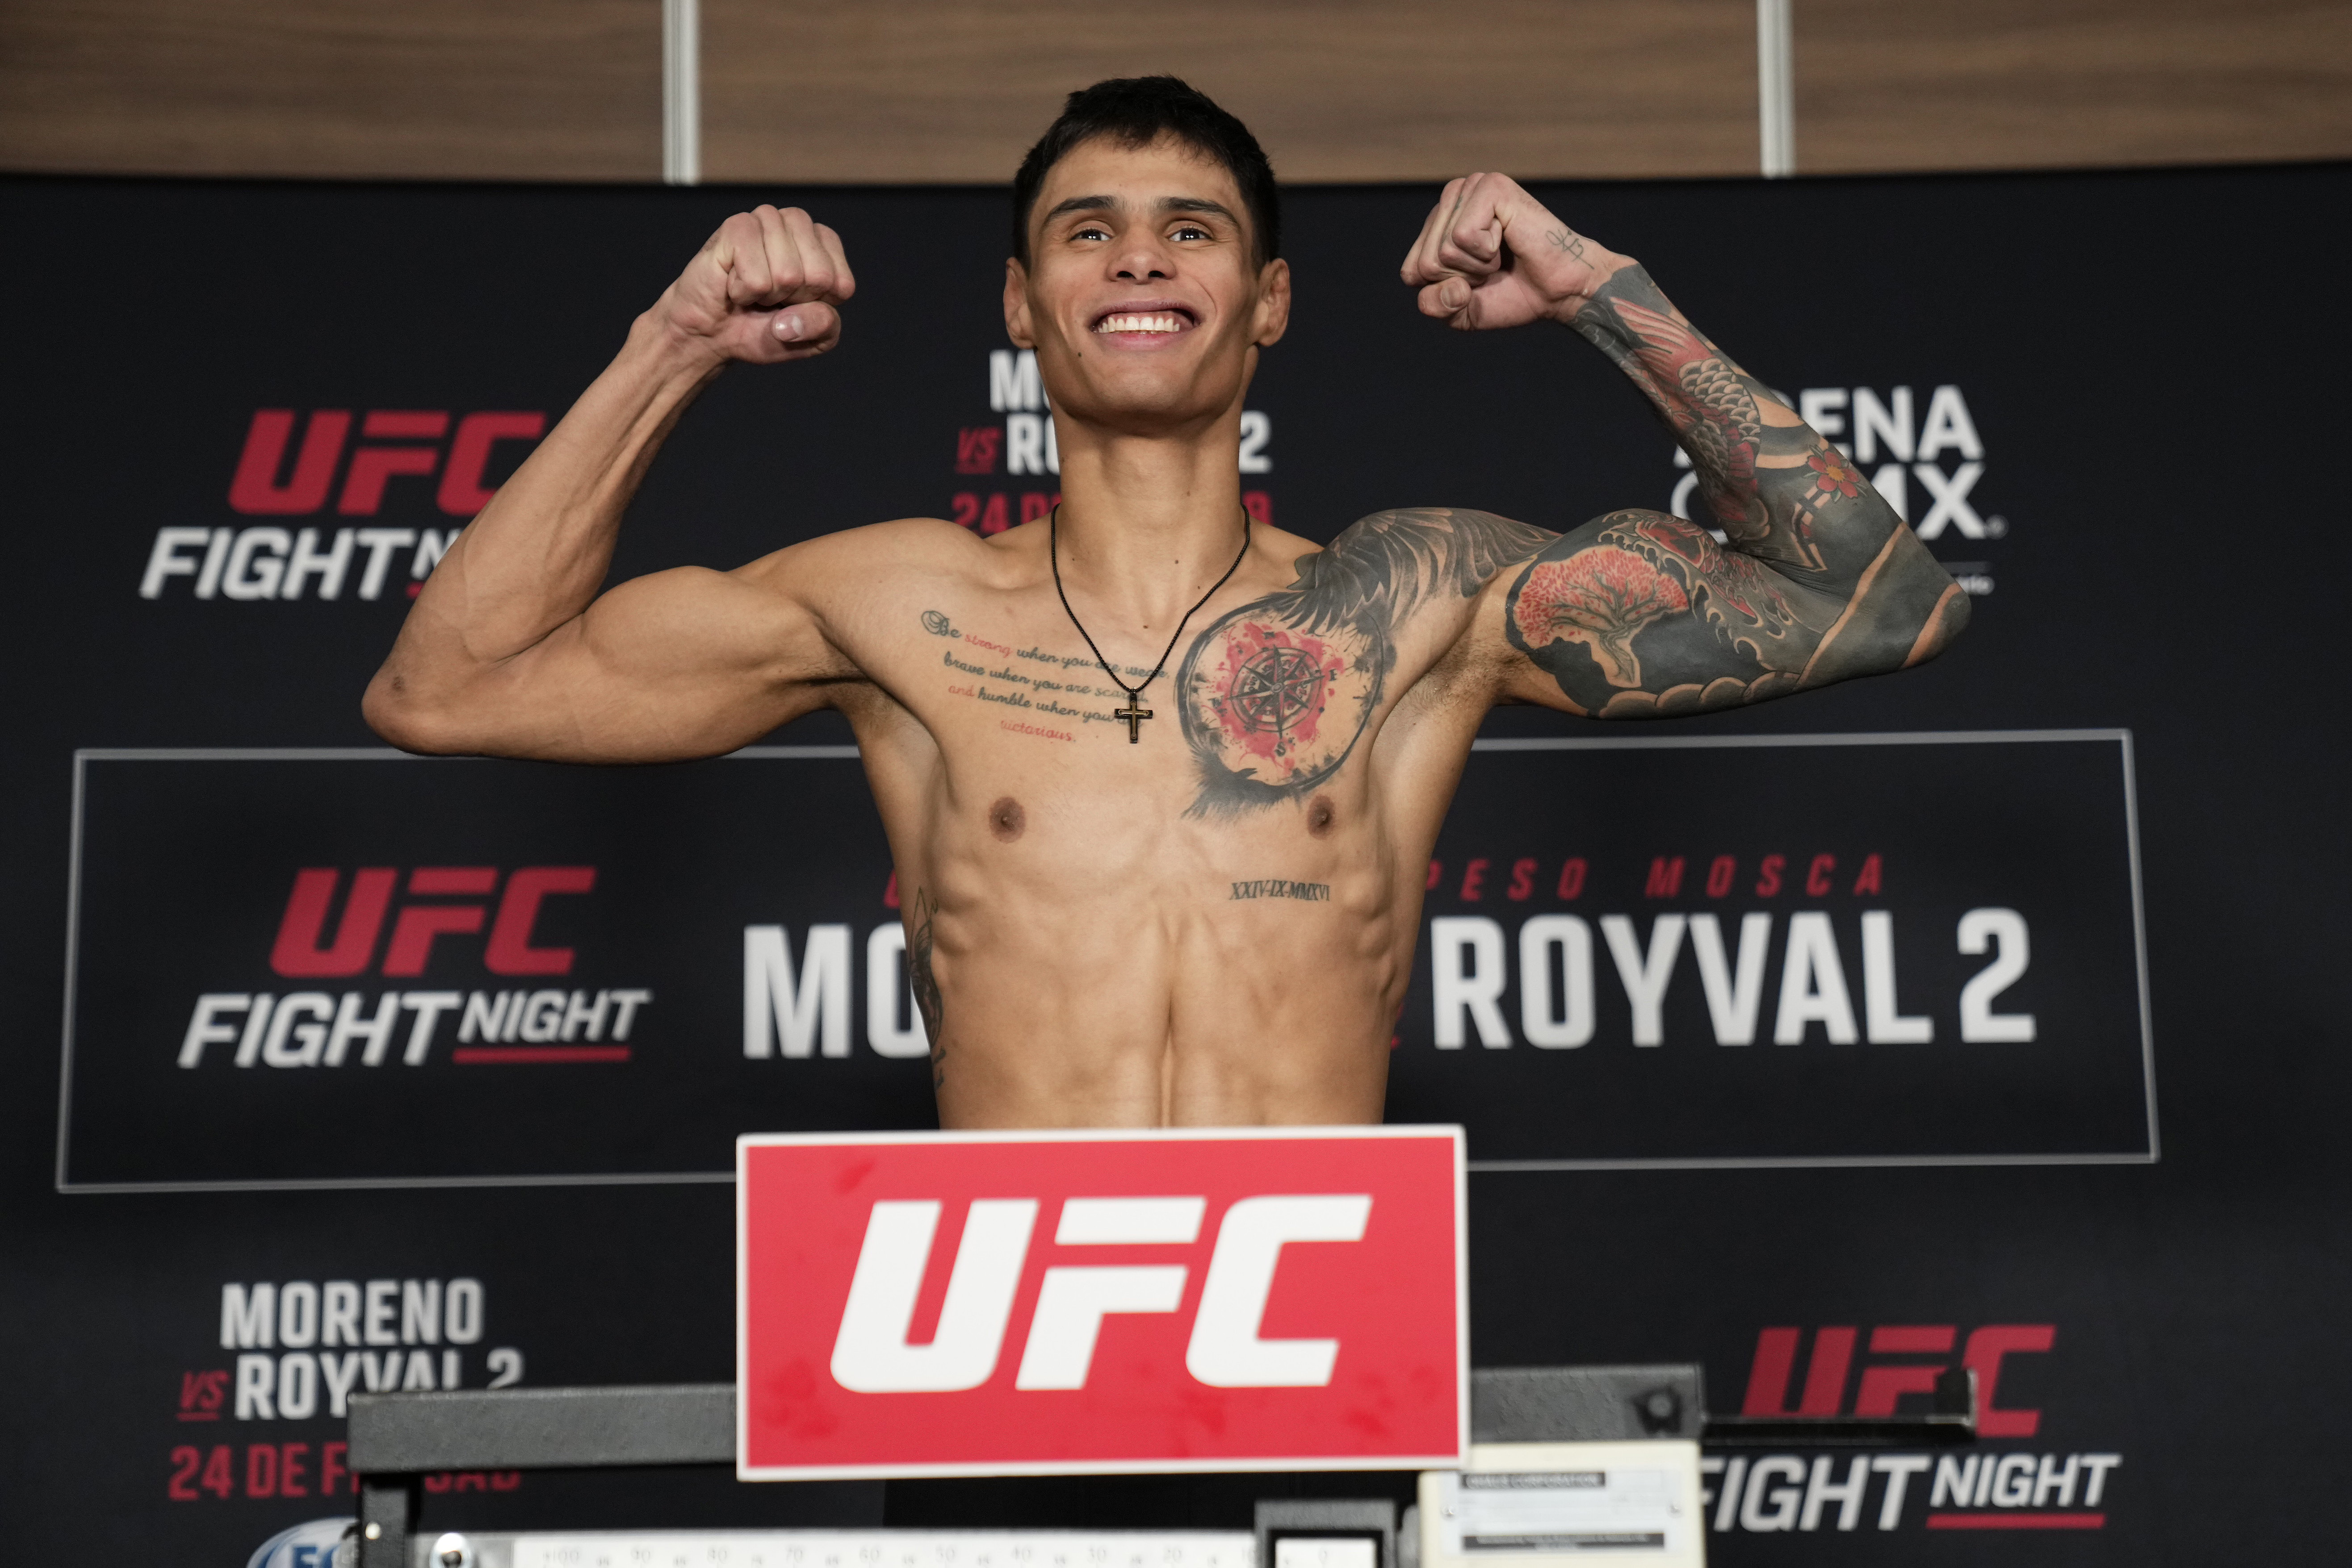 UFC Fight Night: Moreno vs Royval 2 Official Weigh-in